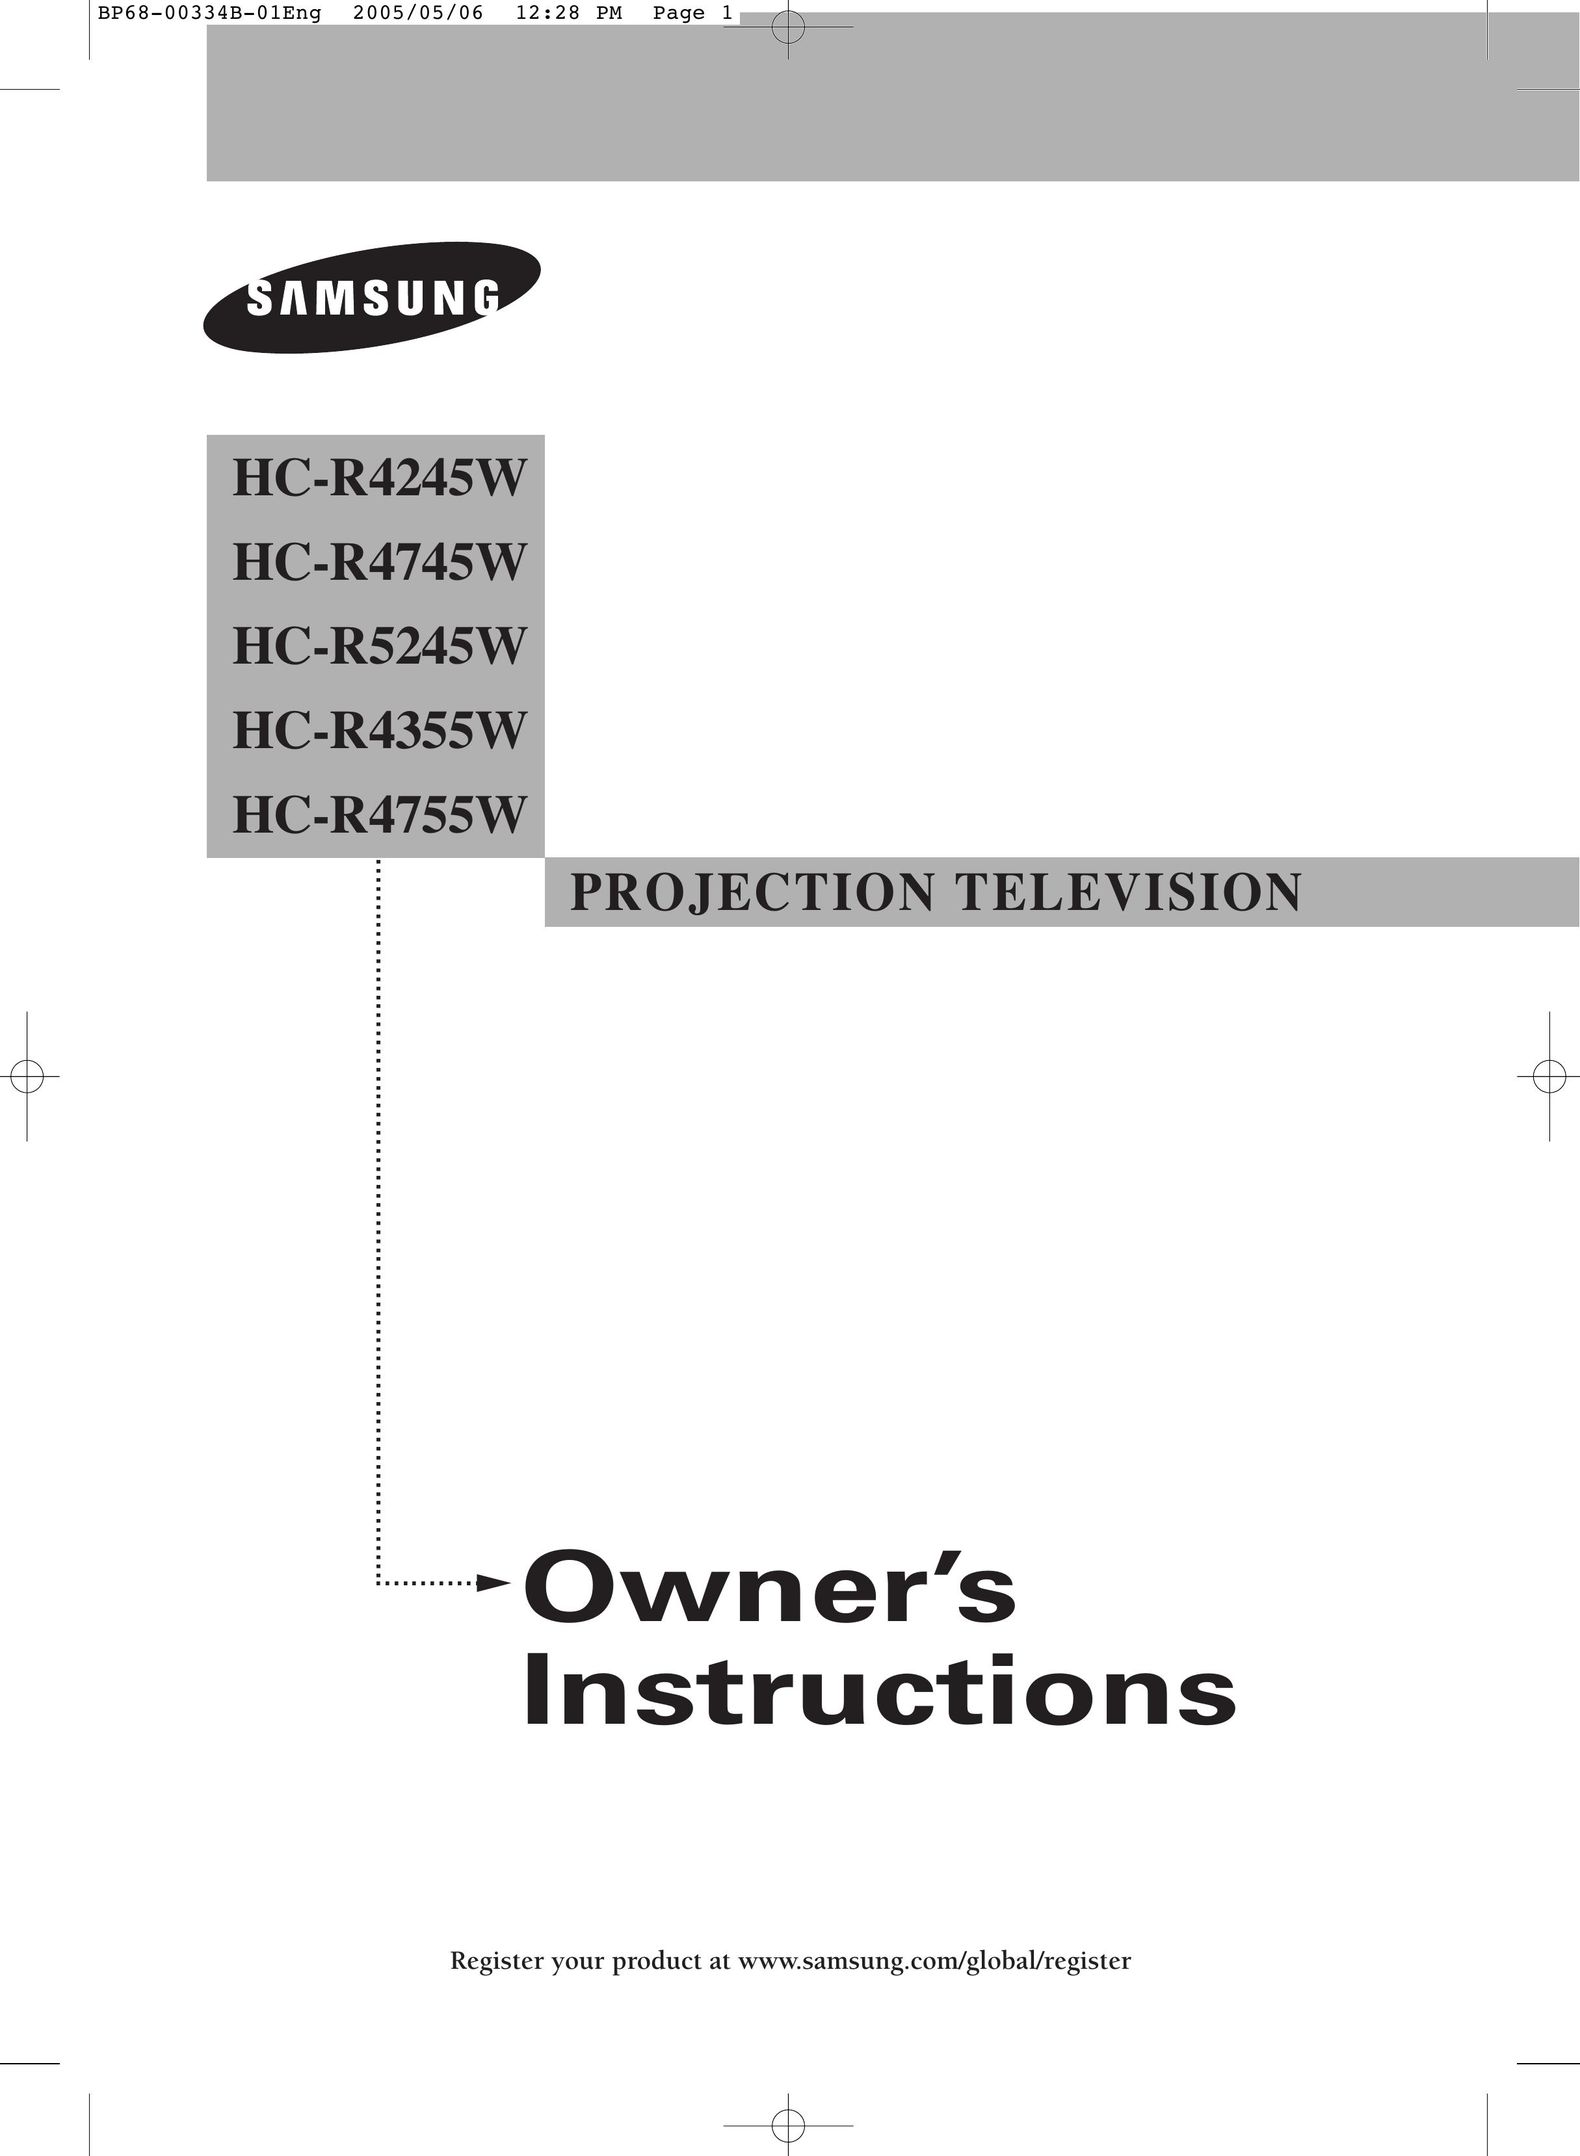 Samsung HC-R4755W Projection Television User Manual